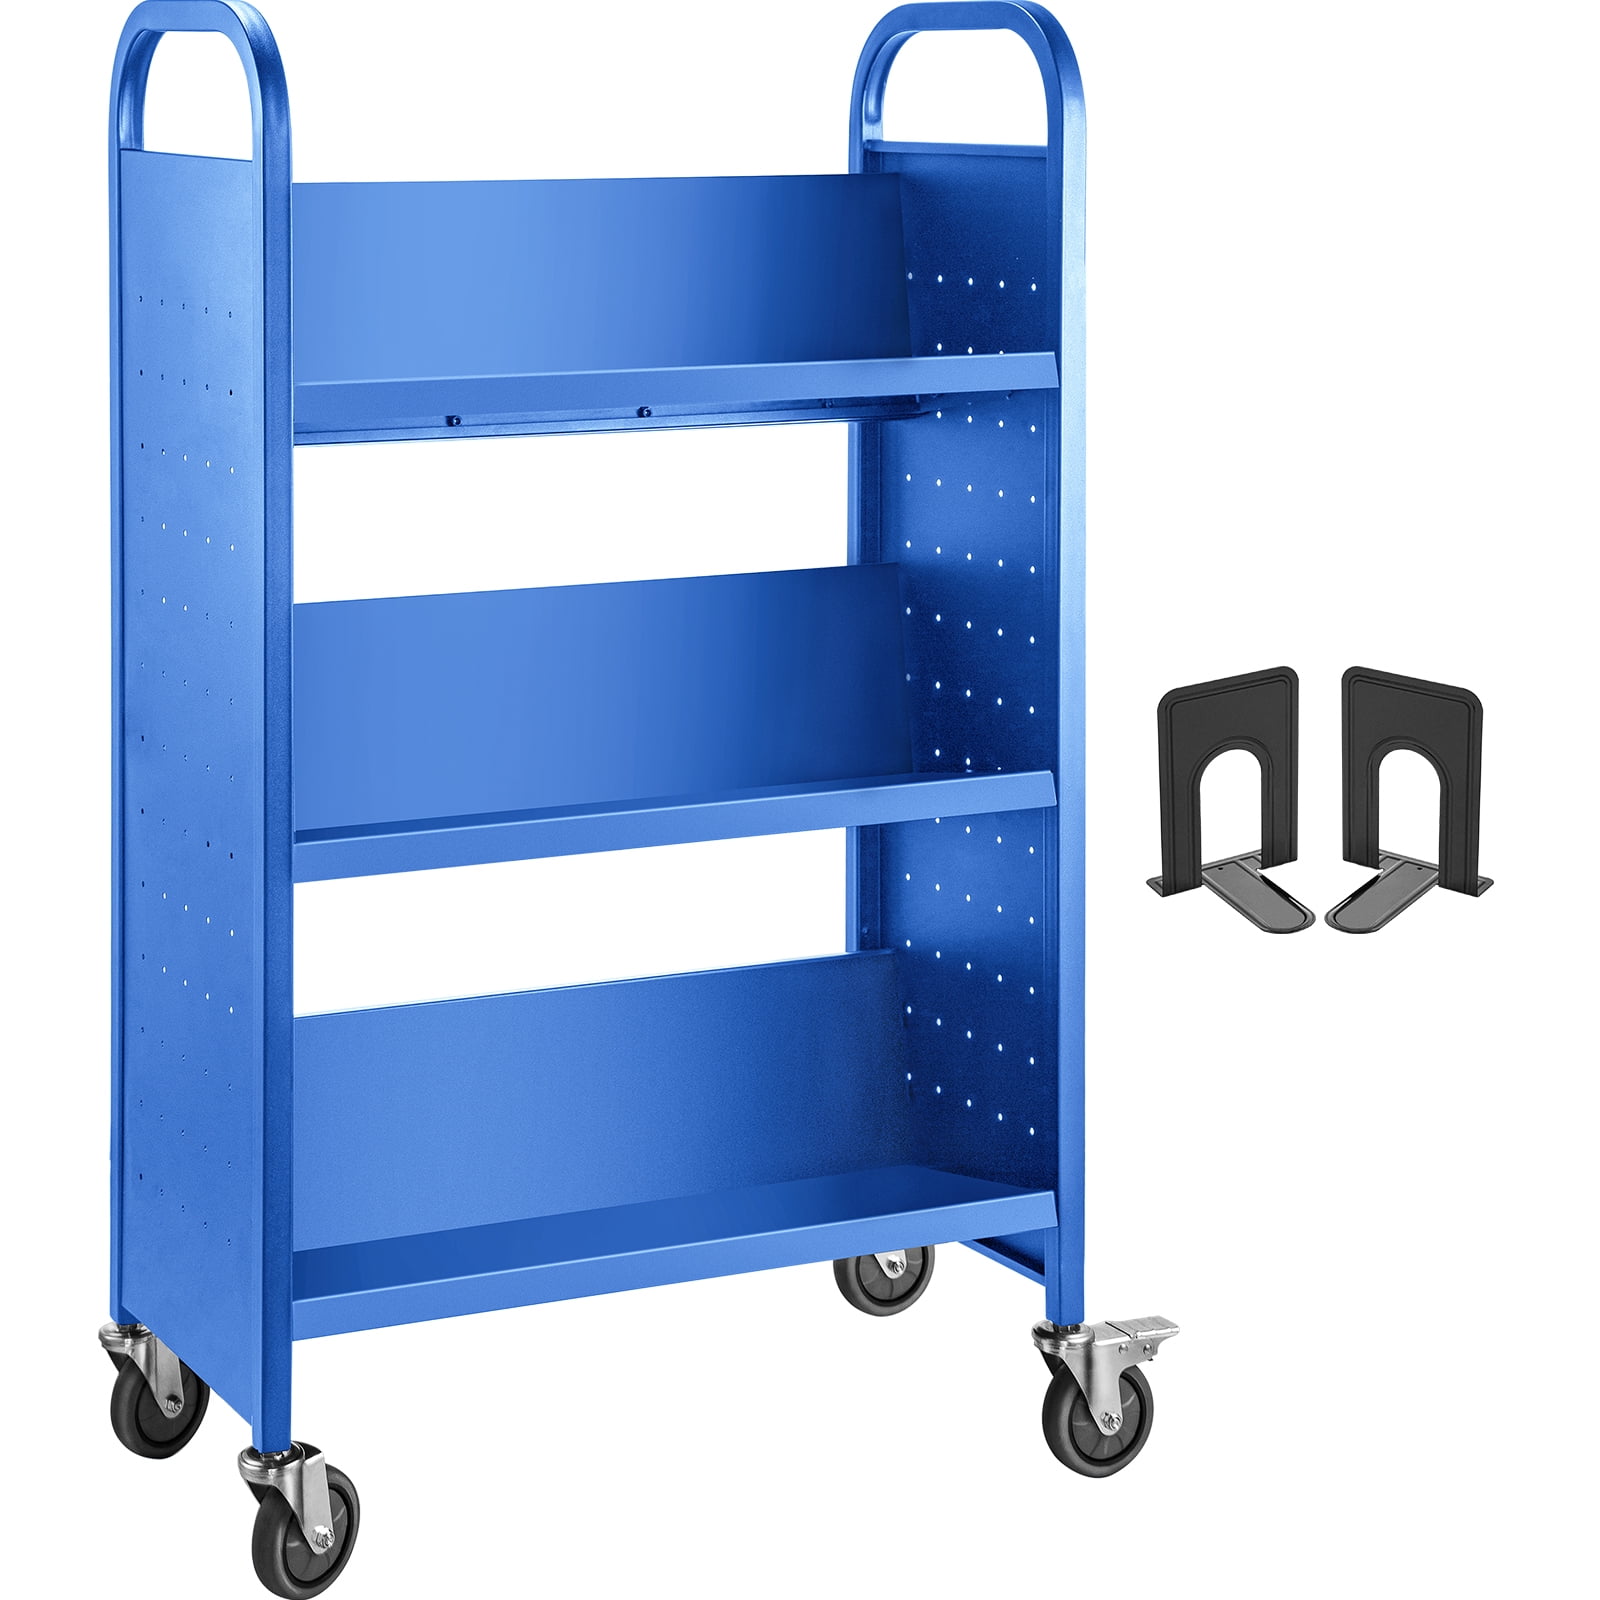 School Smart Folding Metal Library Book Stand, Blue